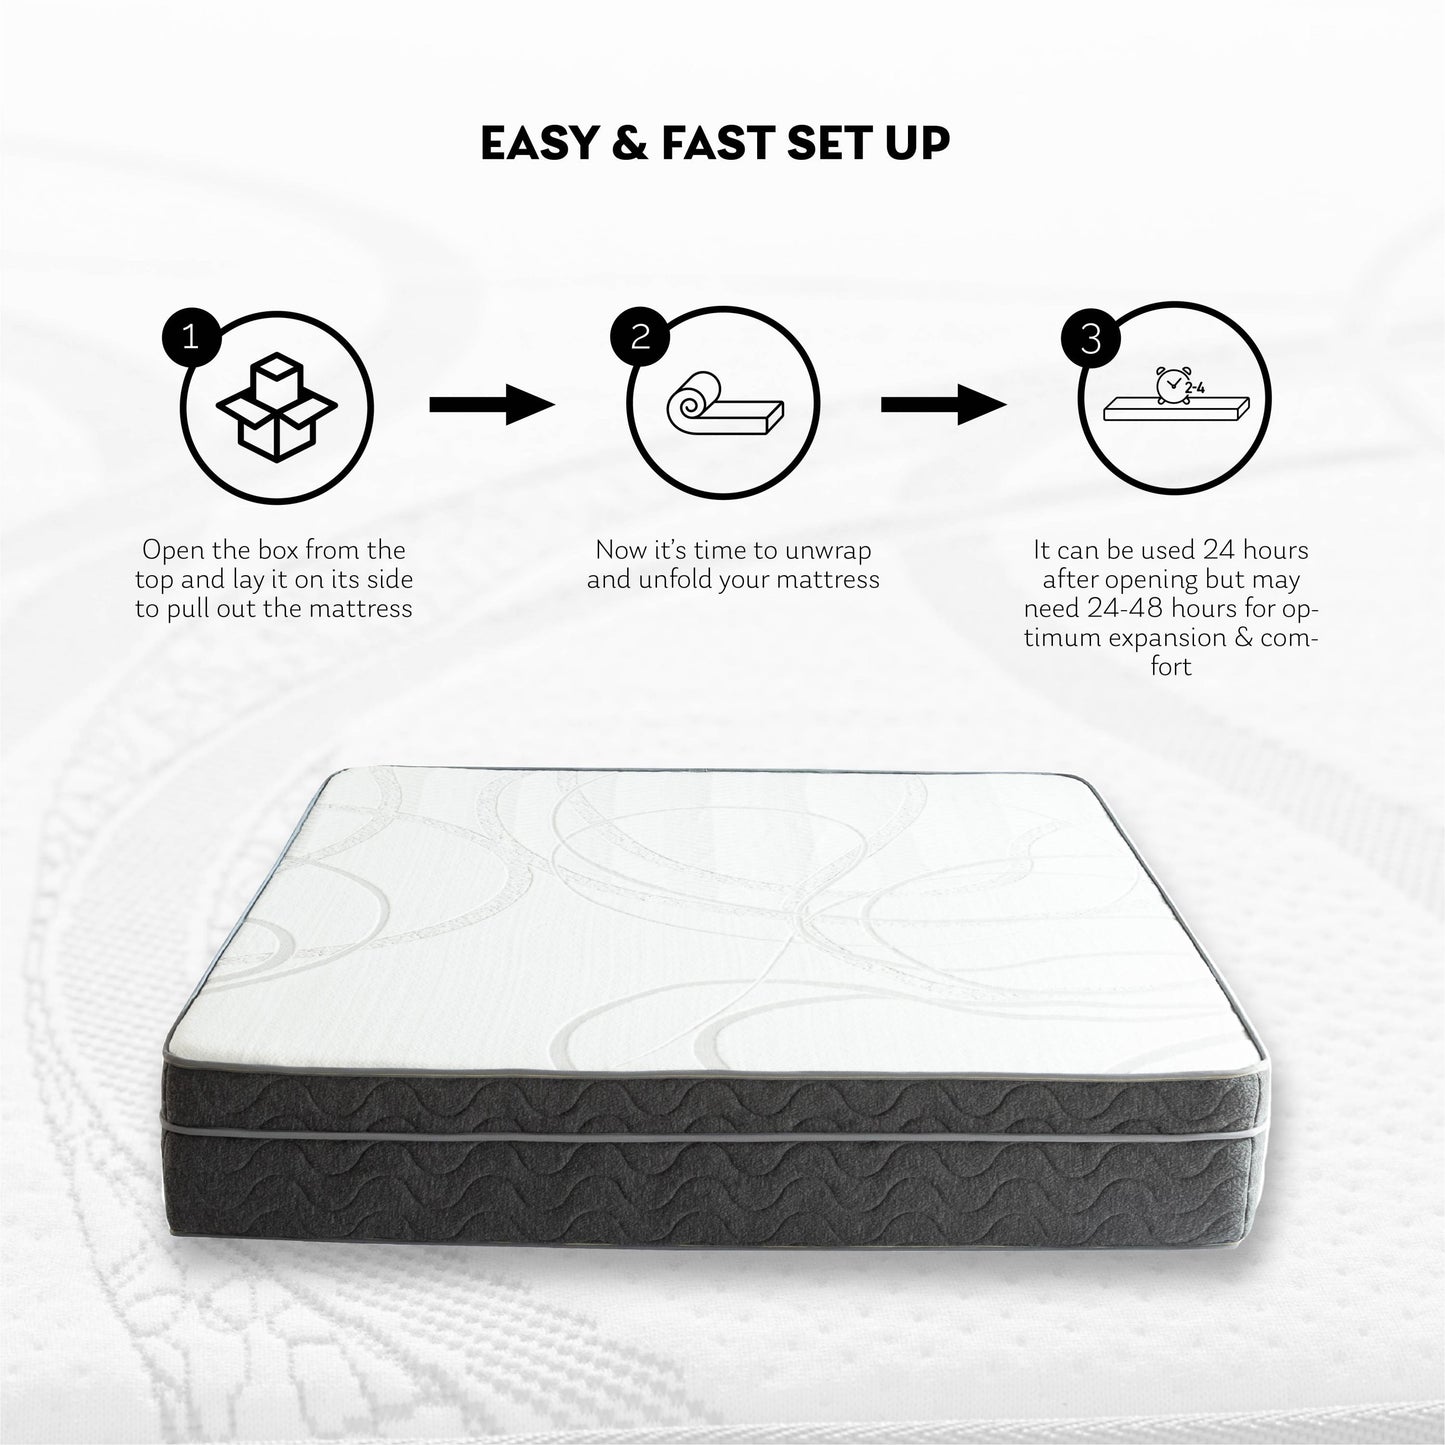 EGO Hybrid 10 Inch TwinXL Mattress, Cooling Gel Infused Memory Foam and Individual Pocket Spring Mattress, Made in USA, Mattress in a Box, CertiPUR-US Certified